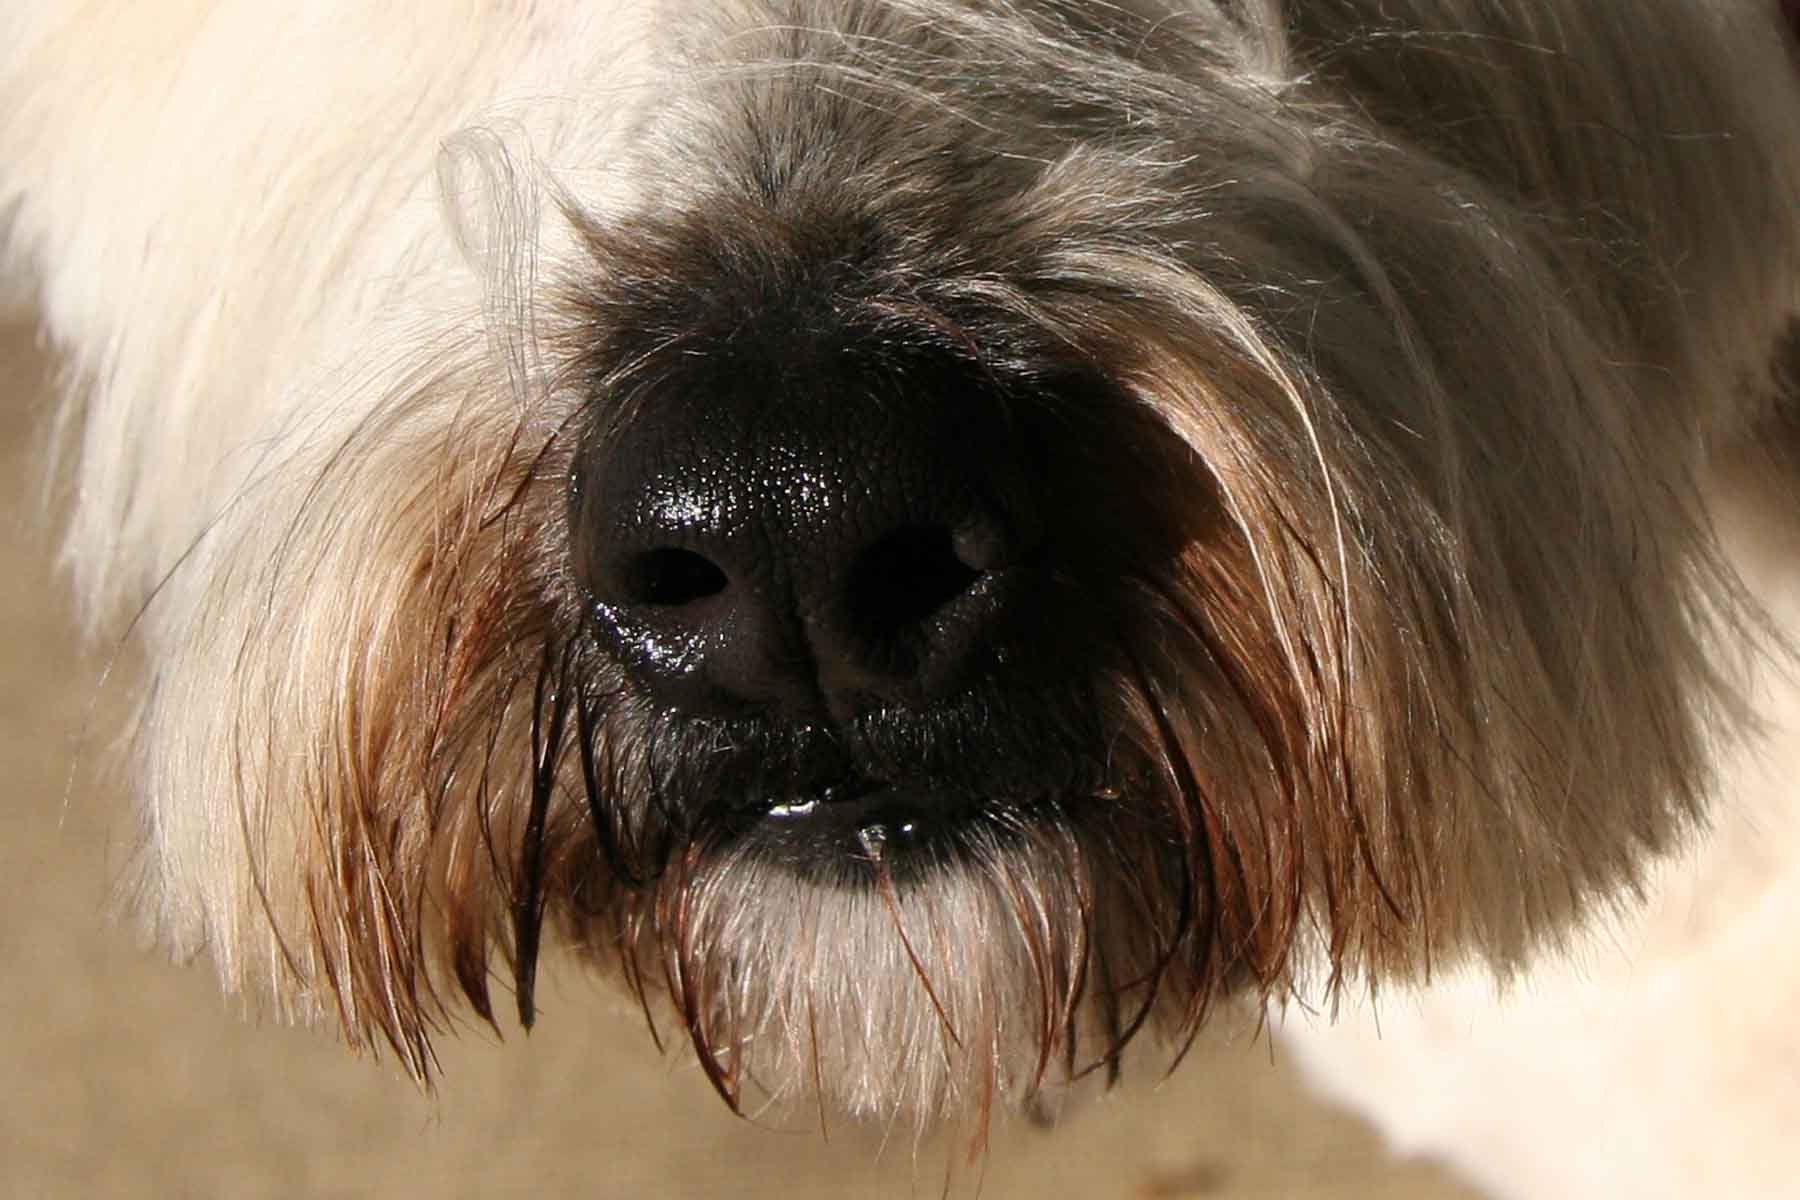 Norman's nose